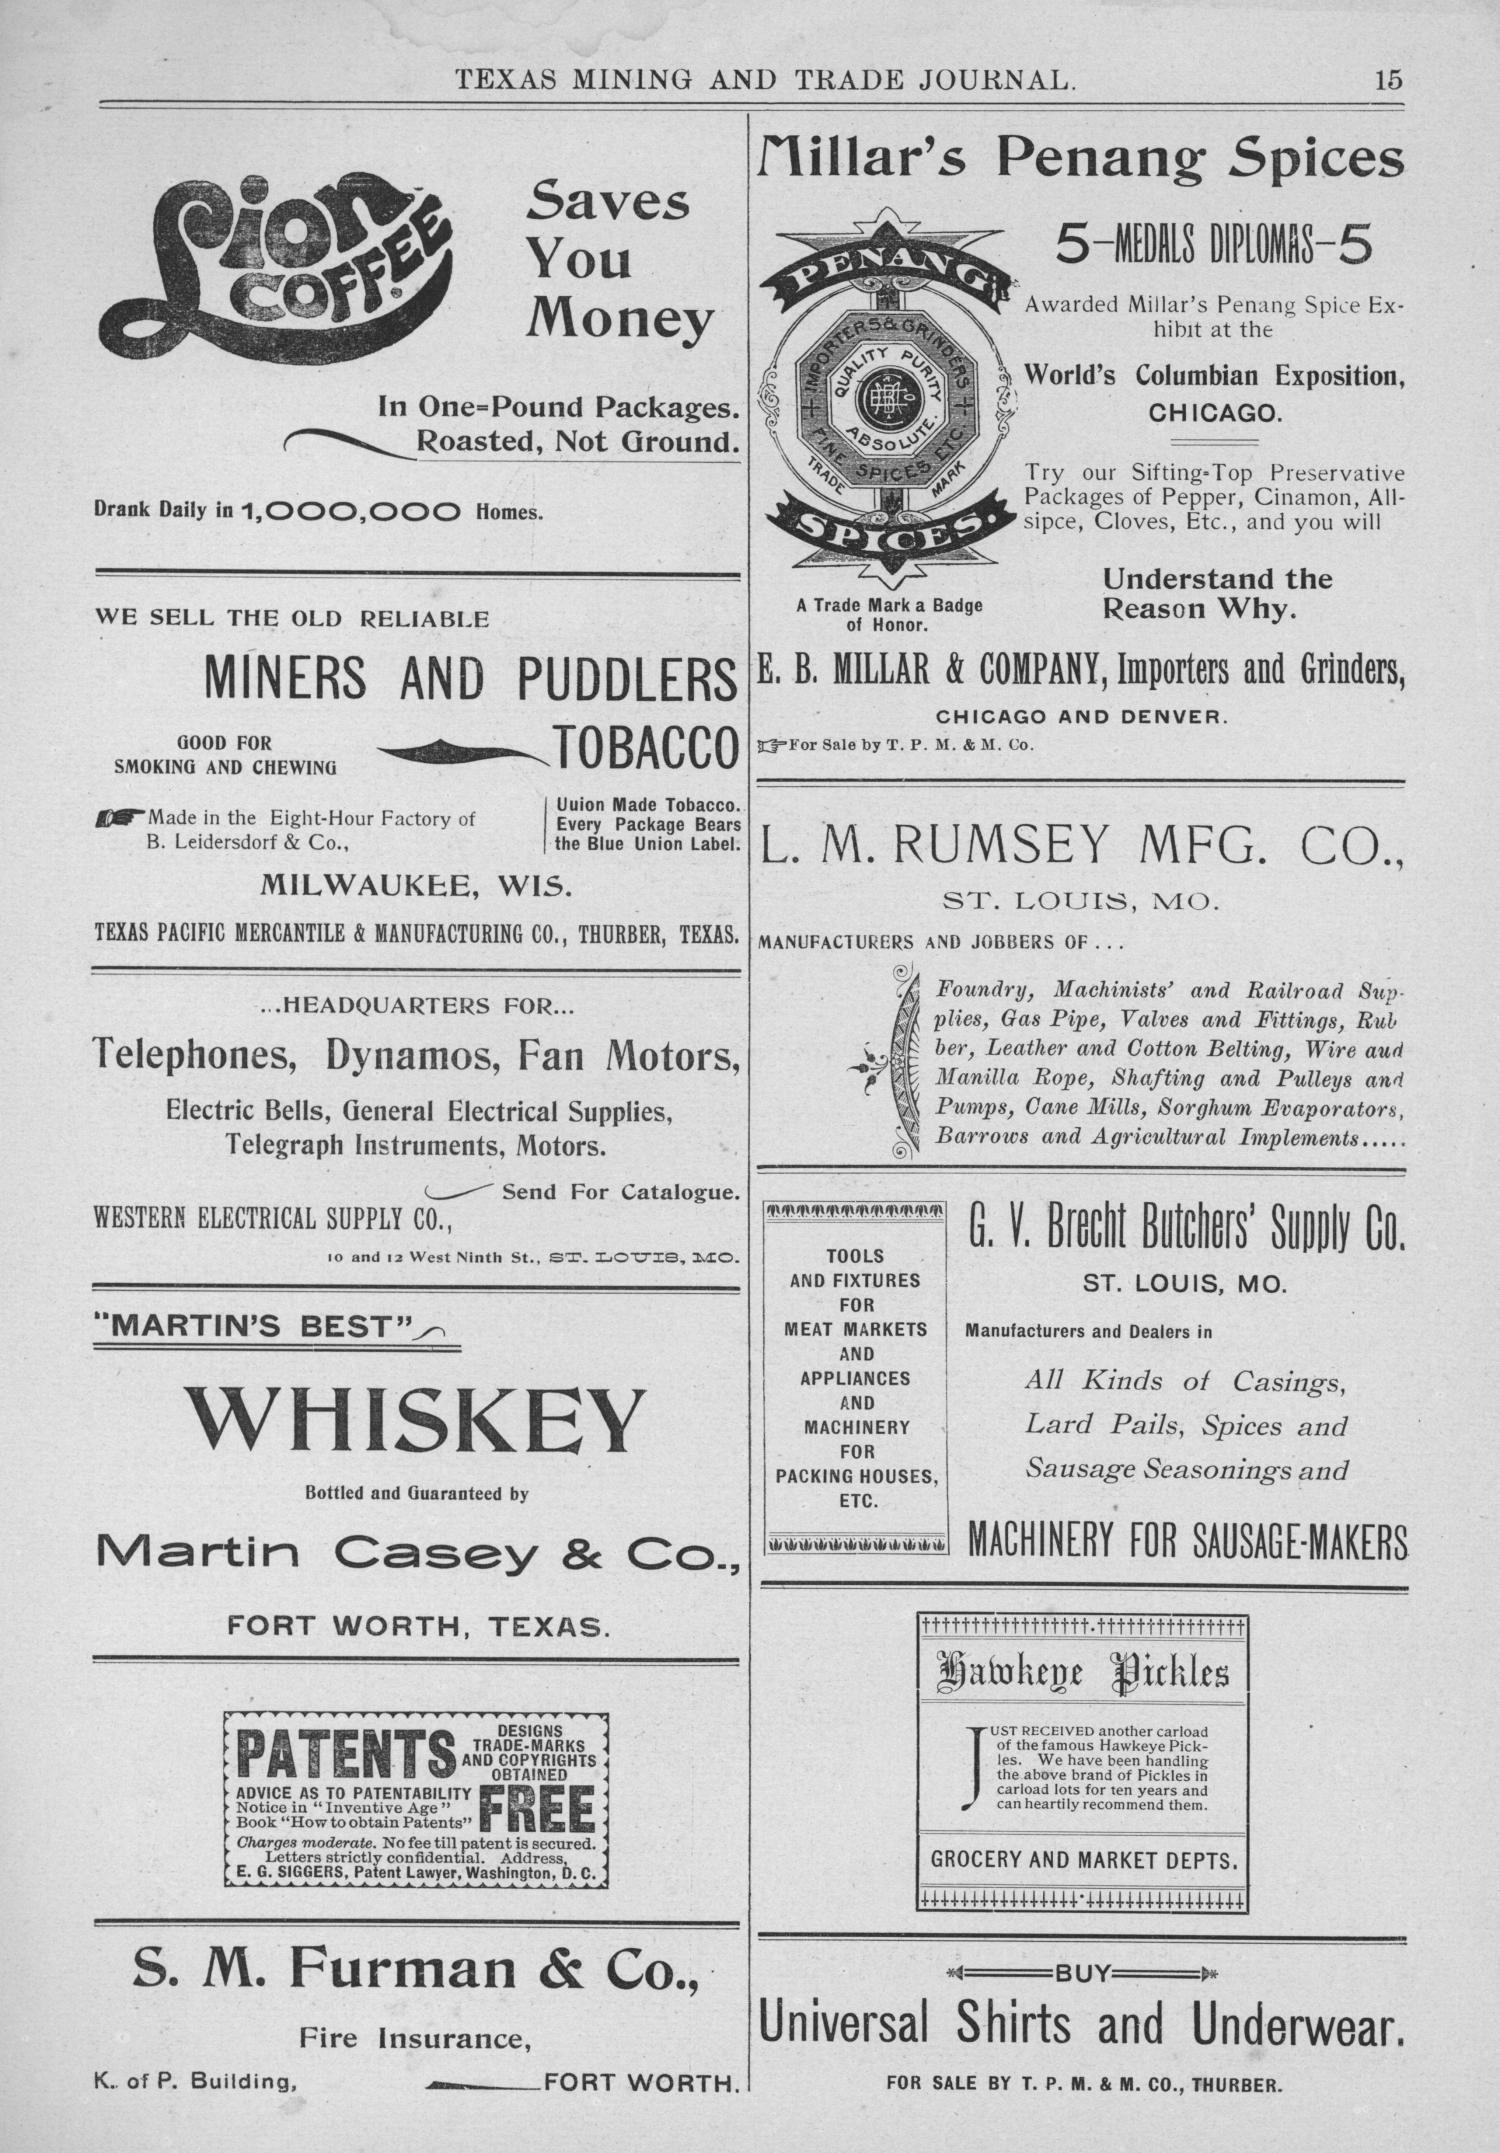 Texas Mining and Trade Journal, Volume 4, Number 31, Saturday, February 17, 1900
                                                
                                                    15
                                                